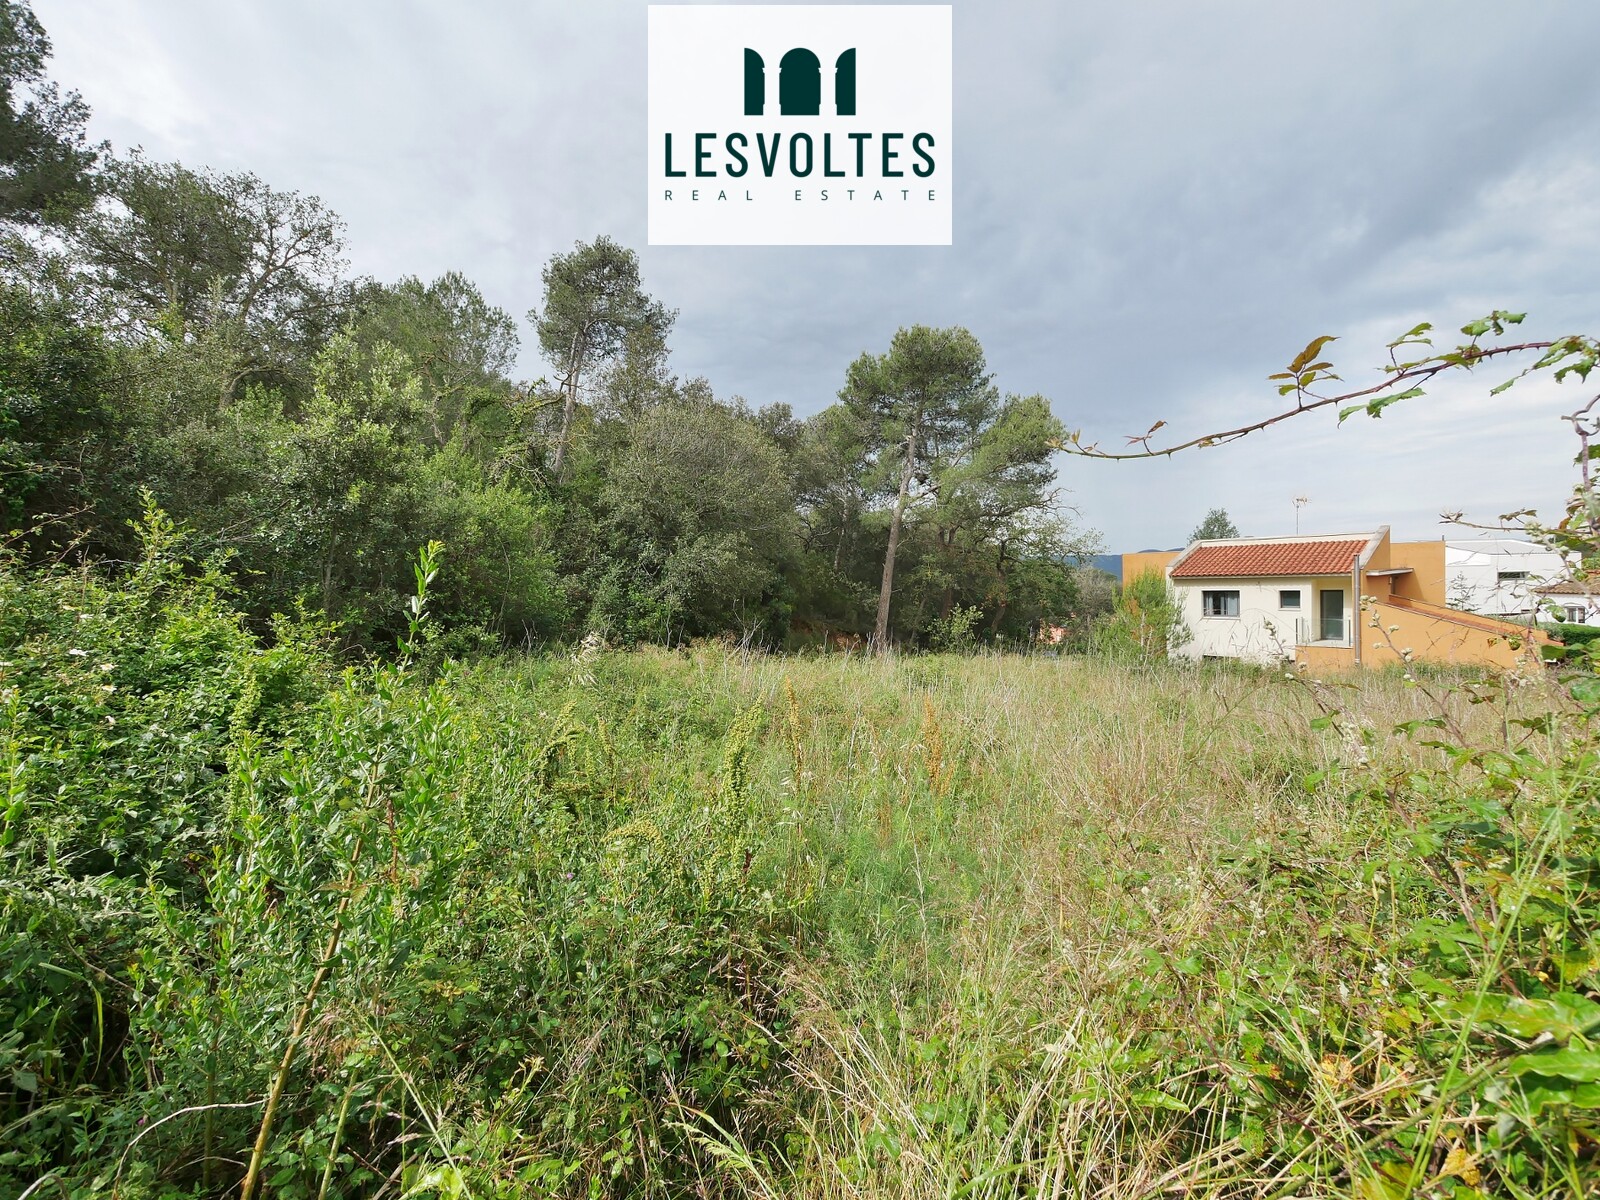 PLOT OF 963 M² LOCATED IN RESIDENCIAL BEGUR